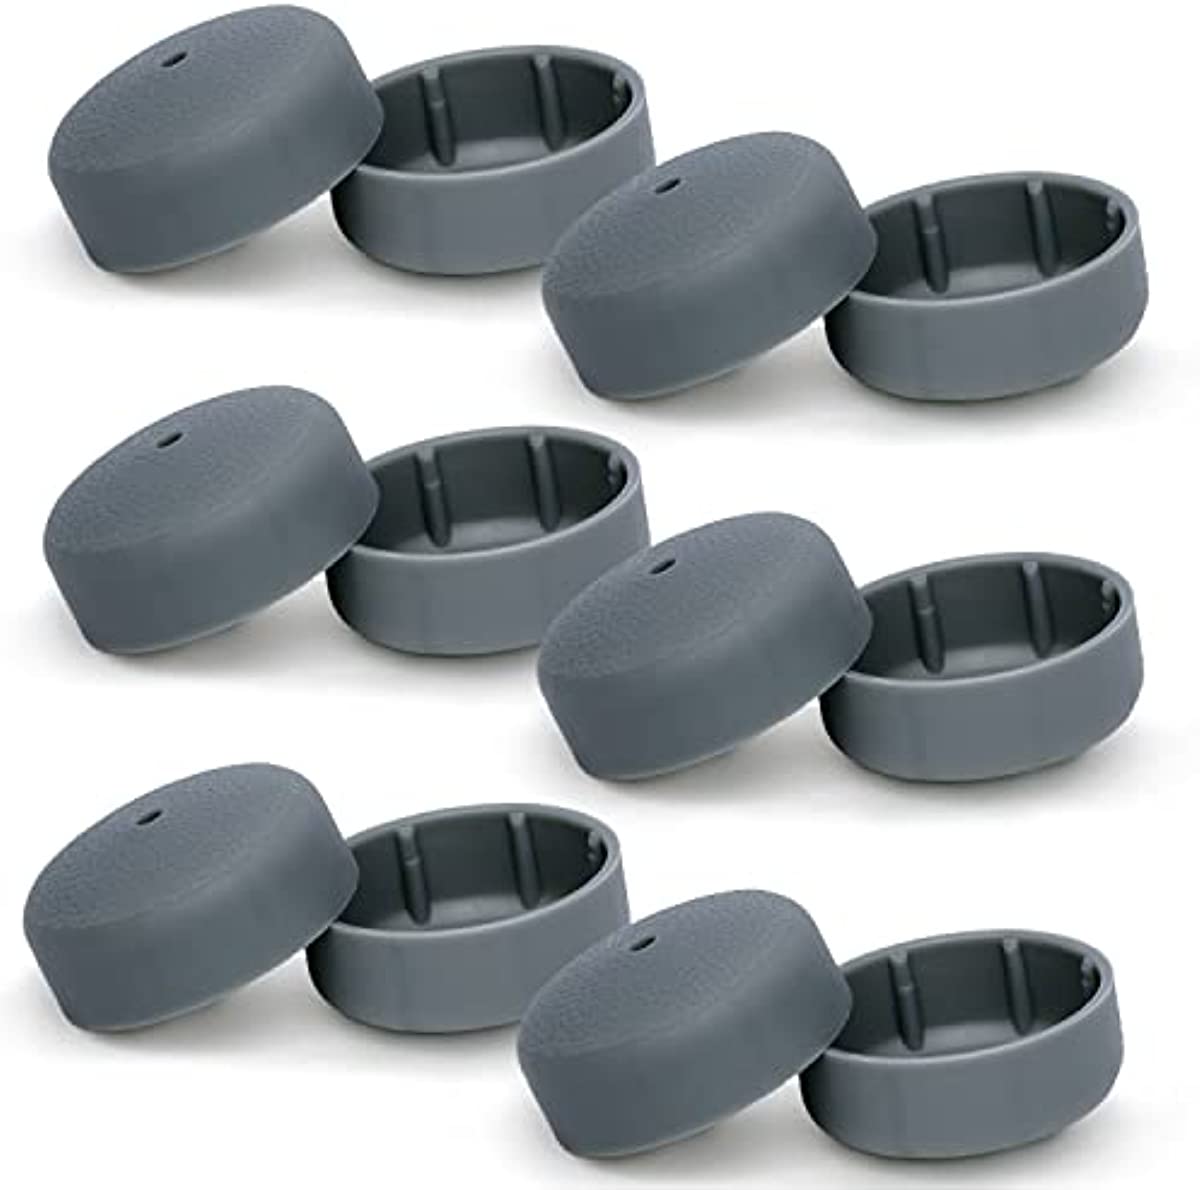 Bundle: 6 Pairs Deluxe TuffCaps Walker Glide Covers for Use with Rubber Tips (Sold Separately) (Gray)